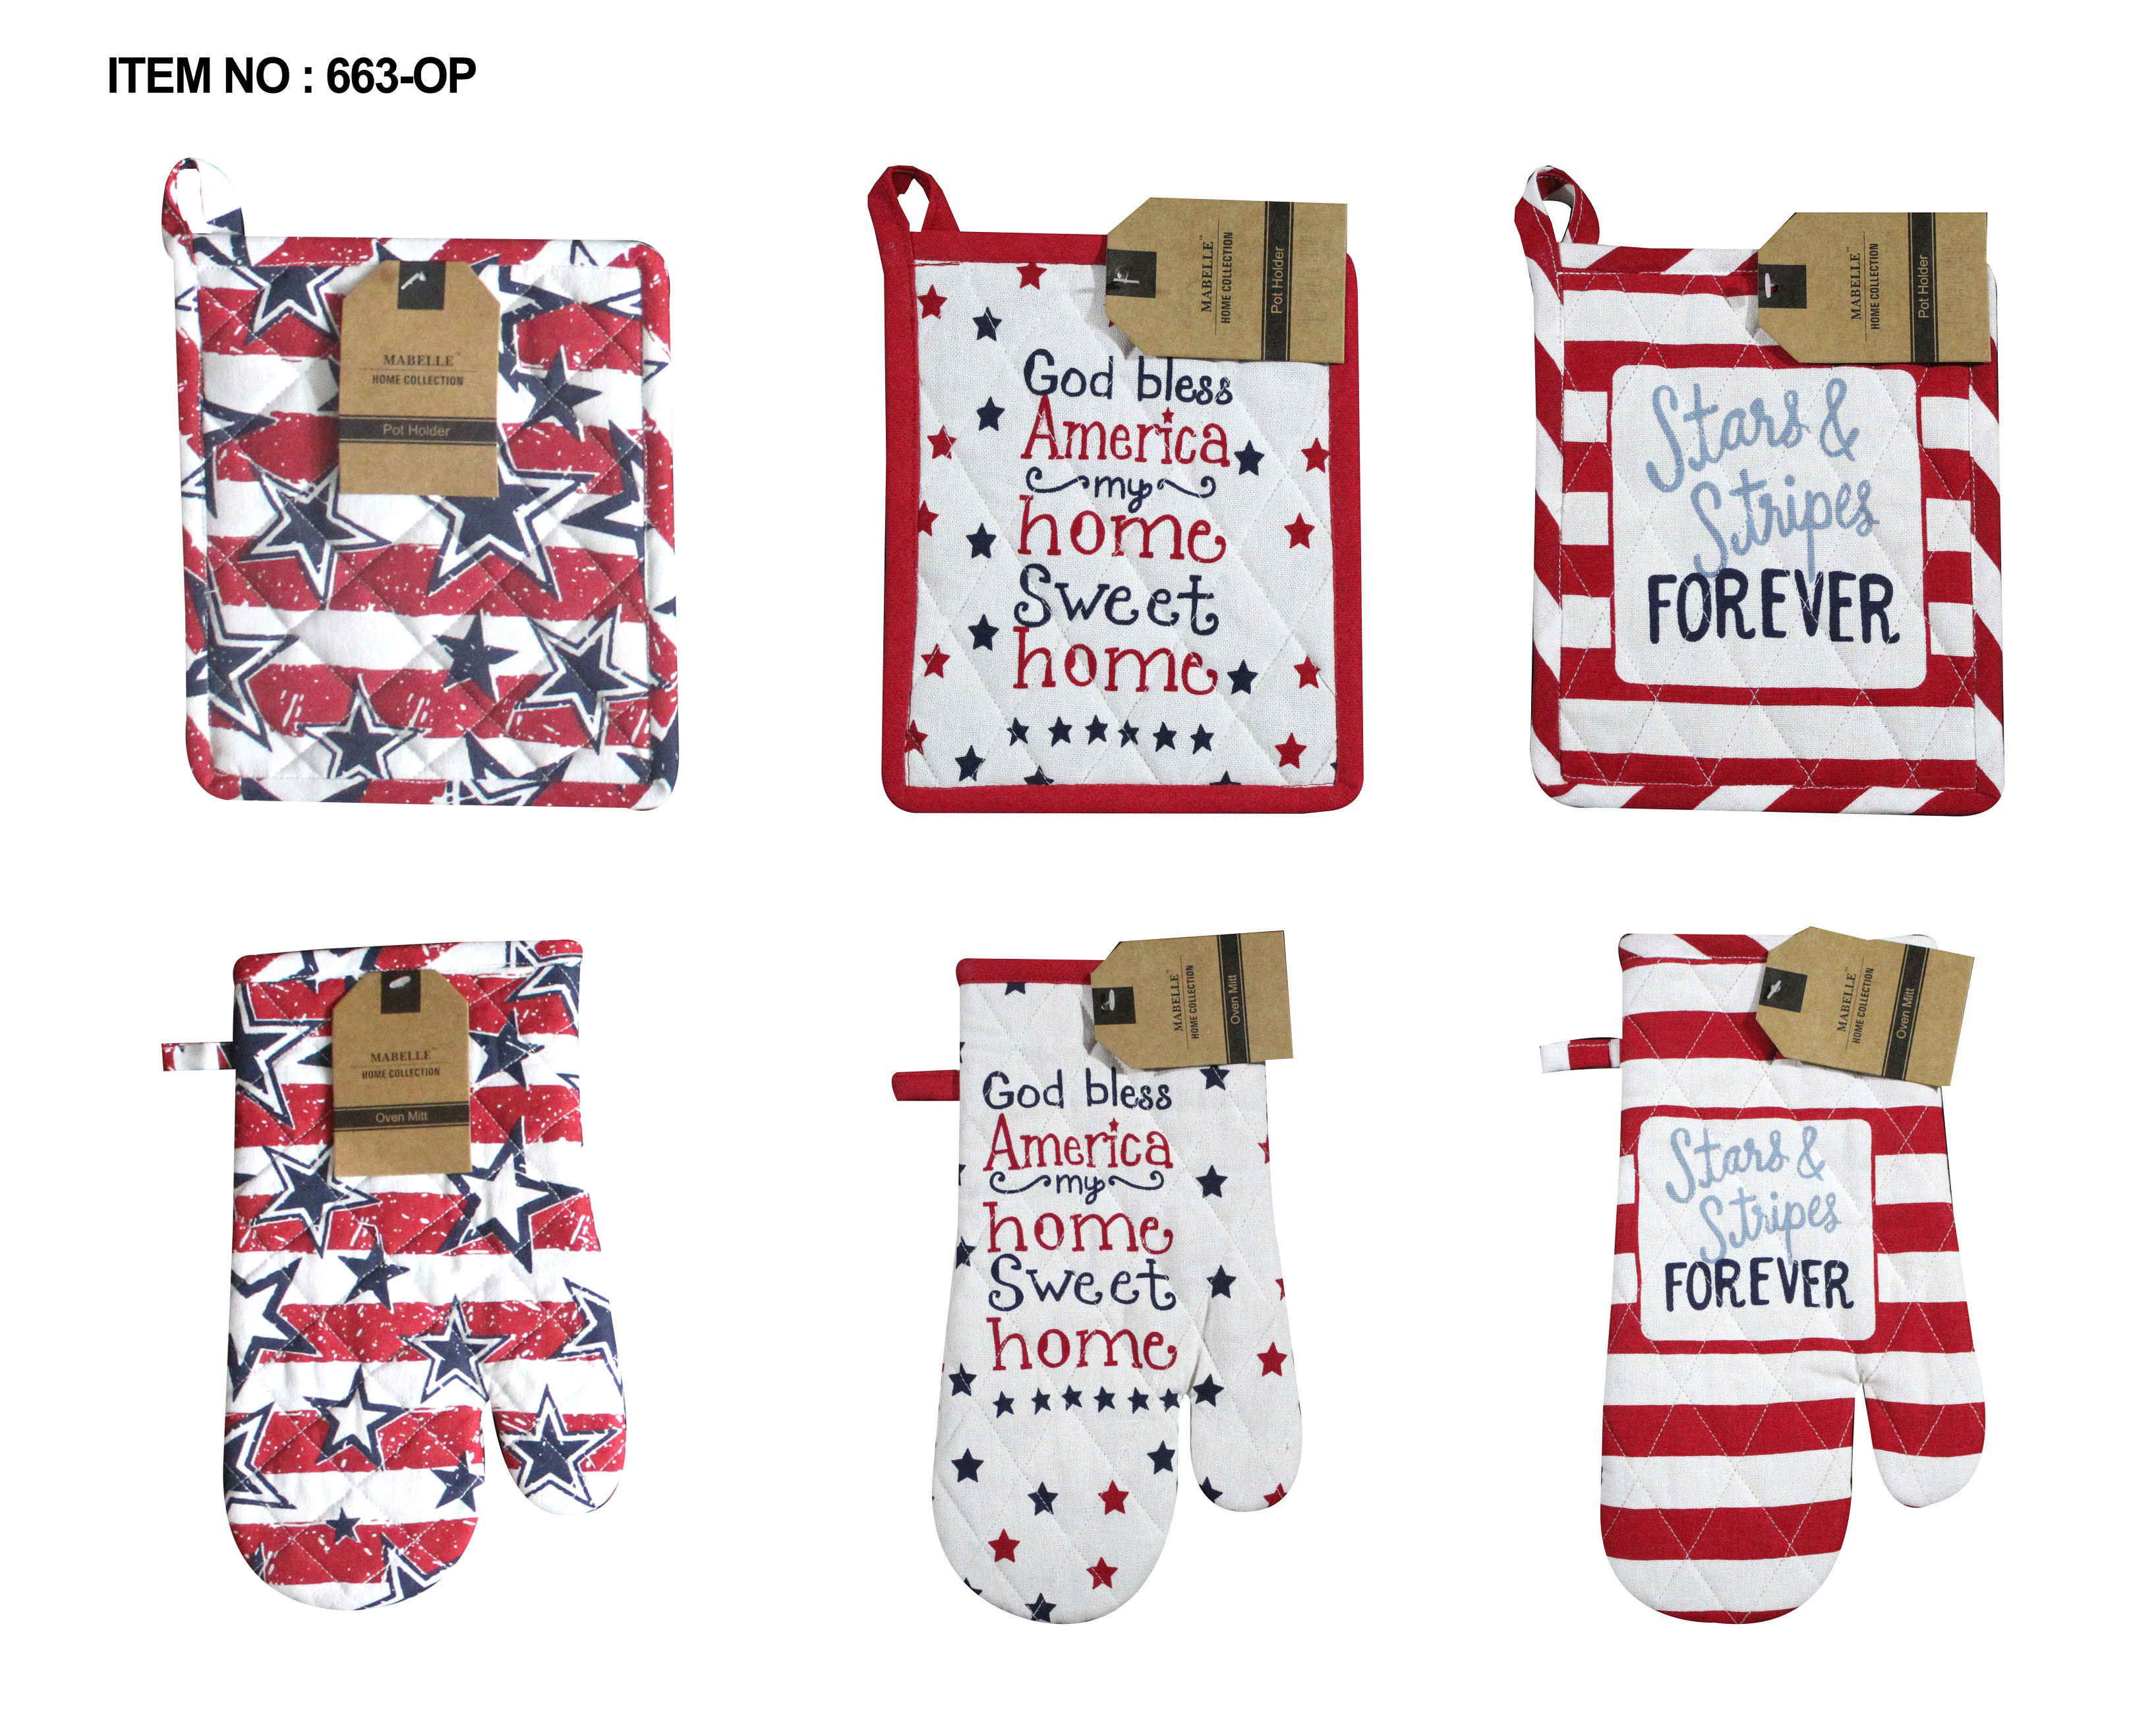 Wholesale Holiday Farmhouse Oven Mitts in 3 Styles - DollarDays